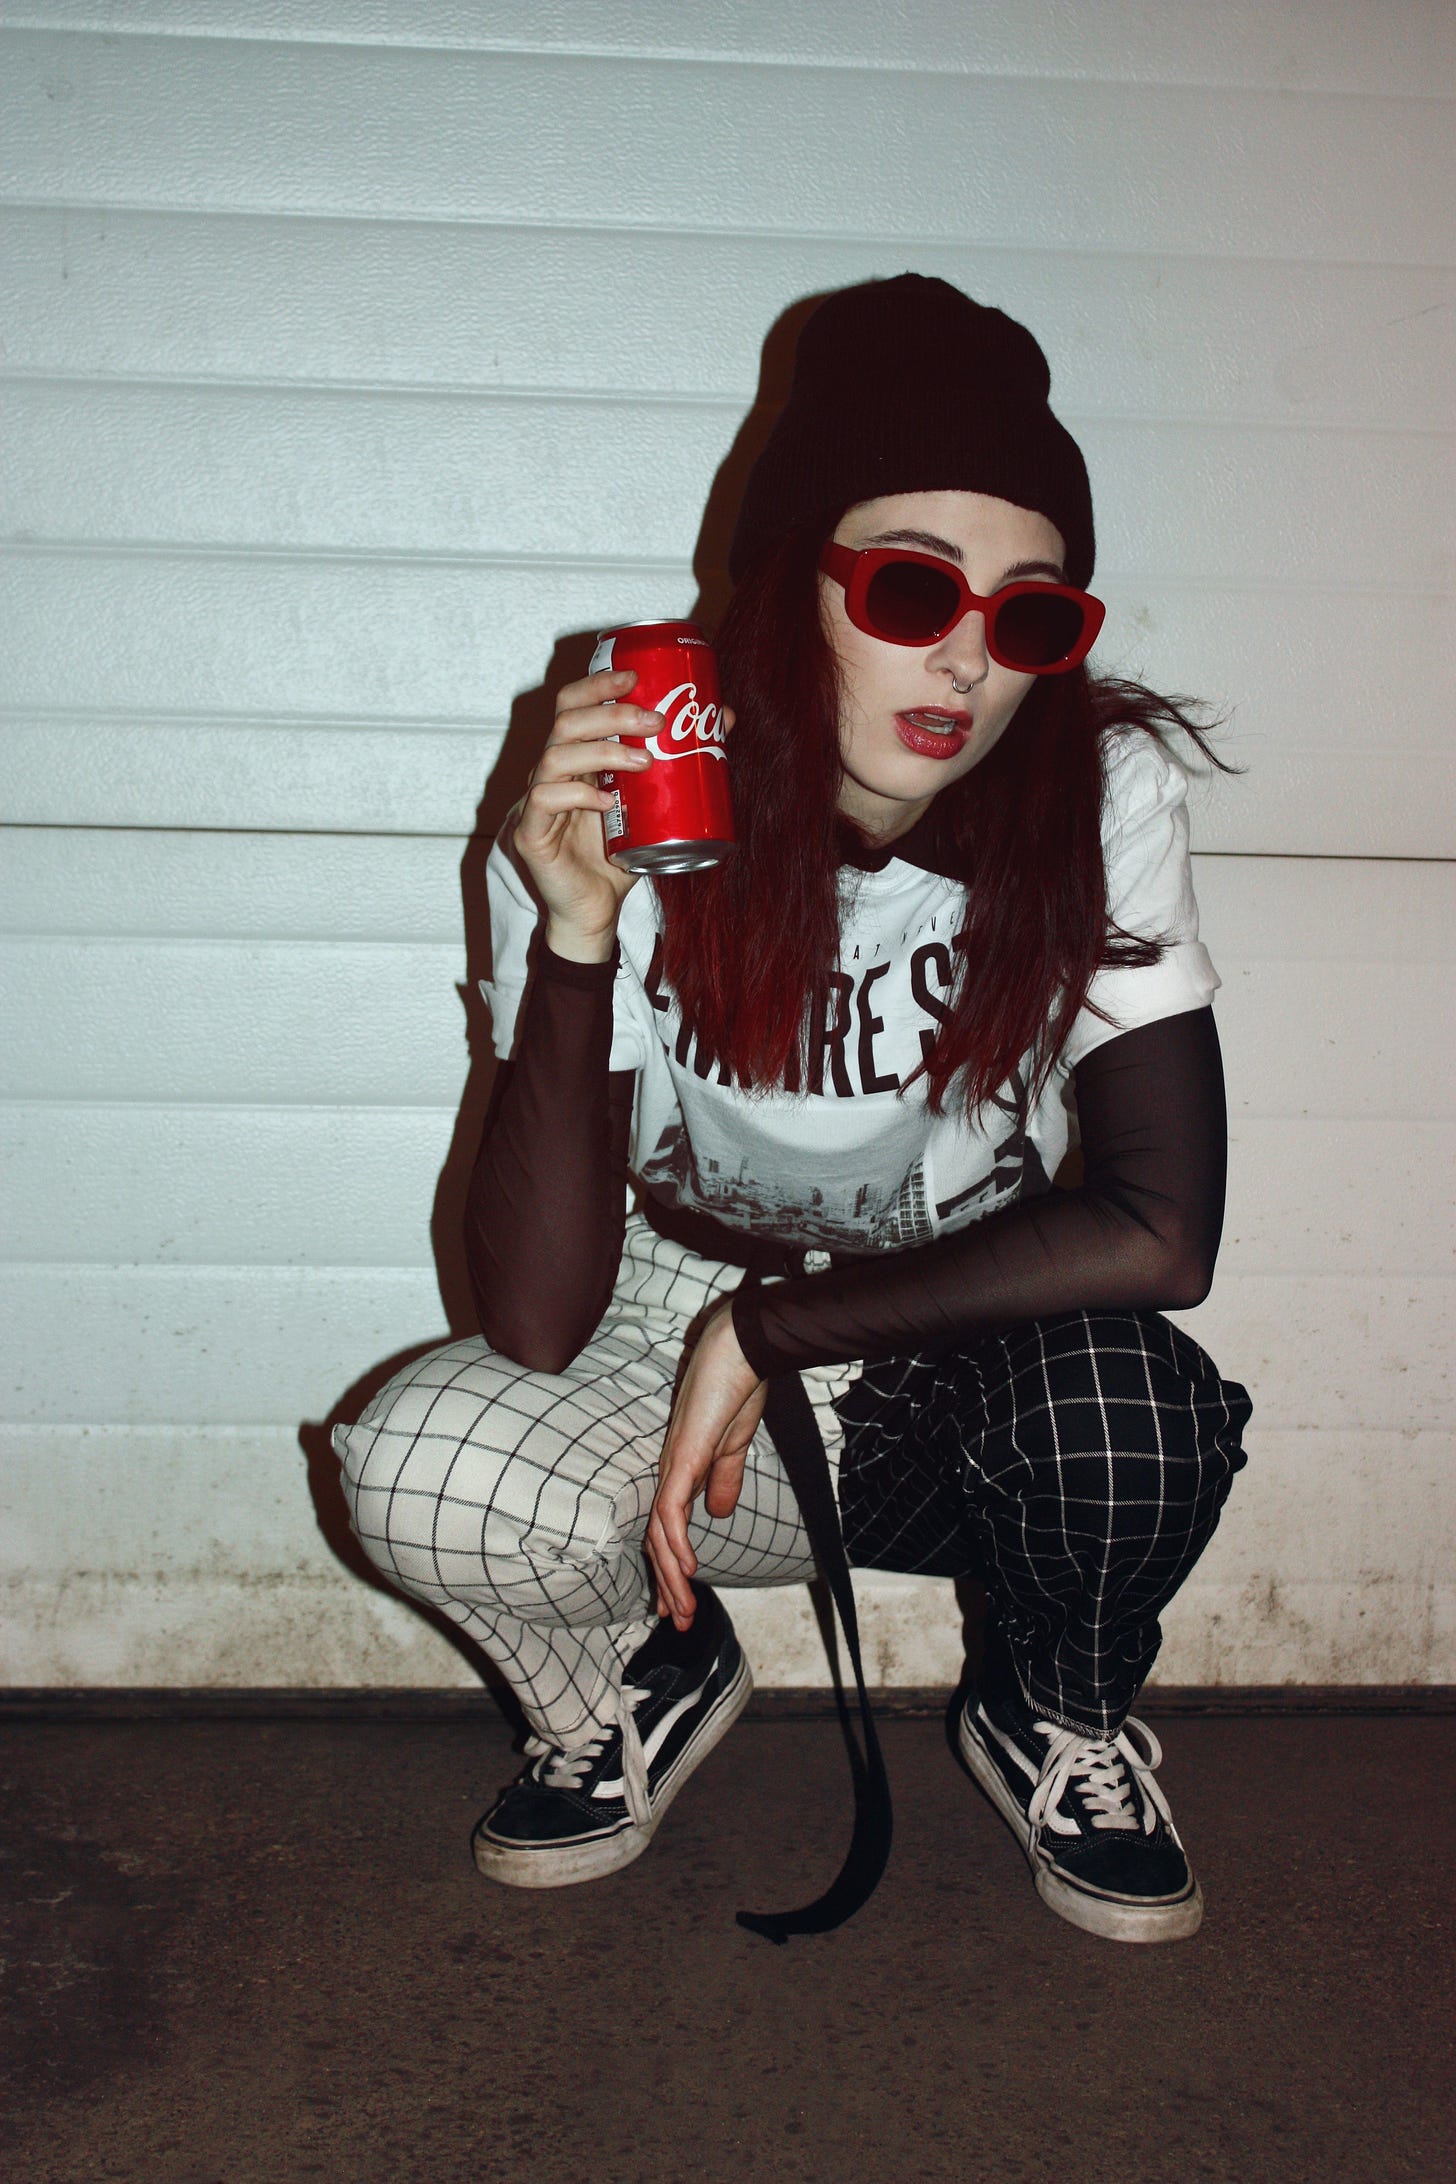 A young woman squats off center holding up a Coke can.